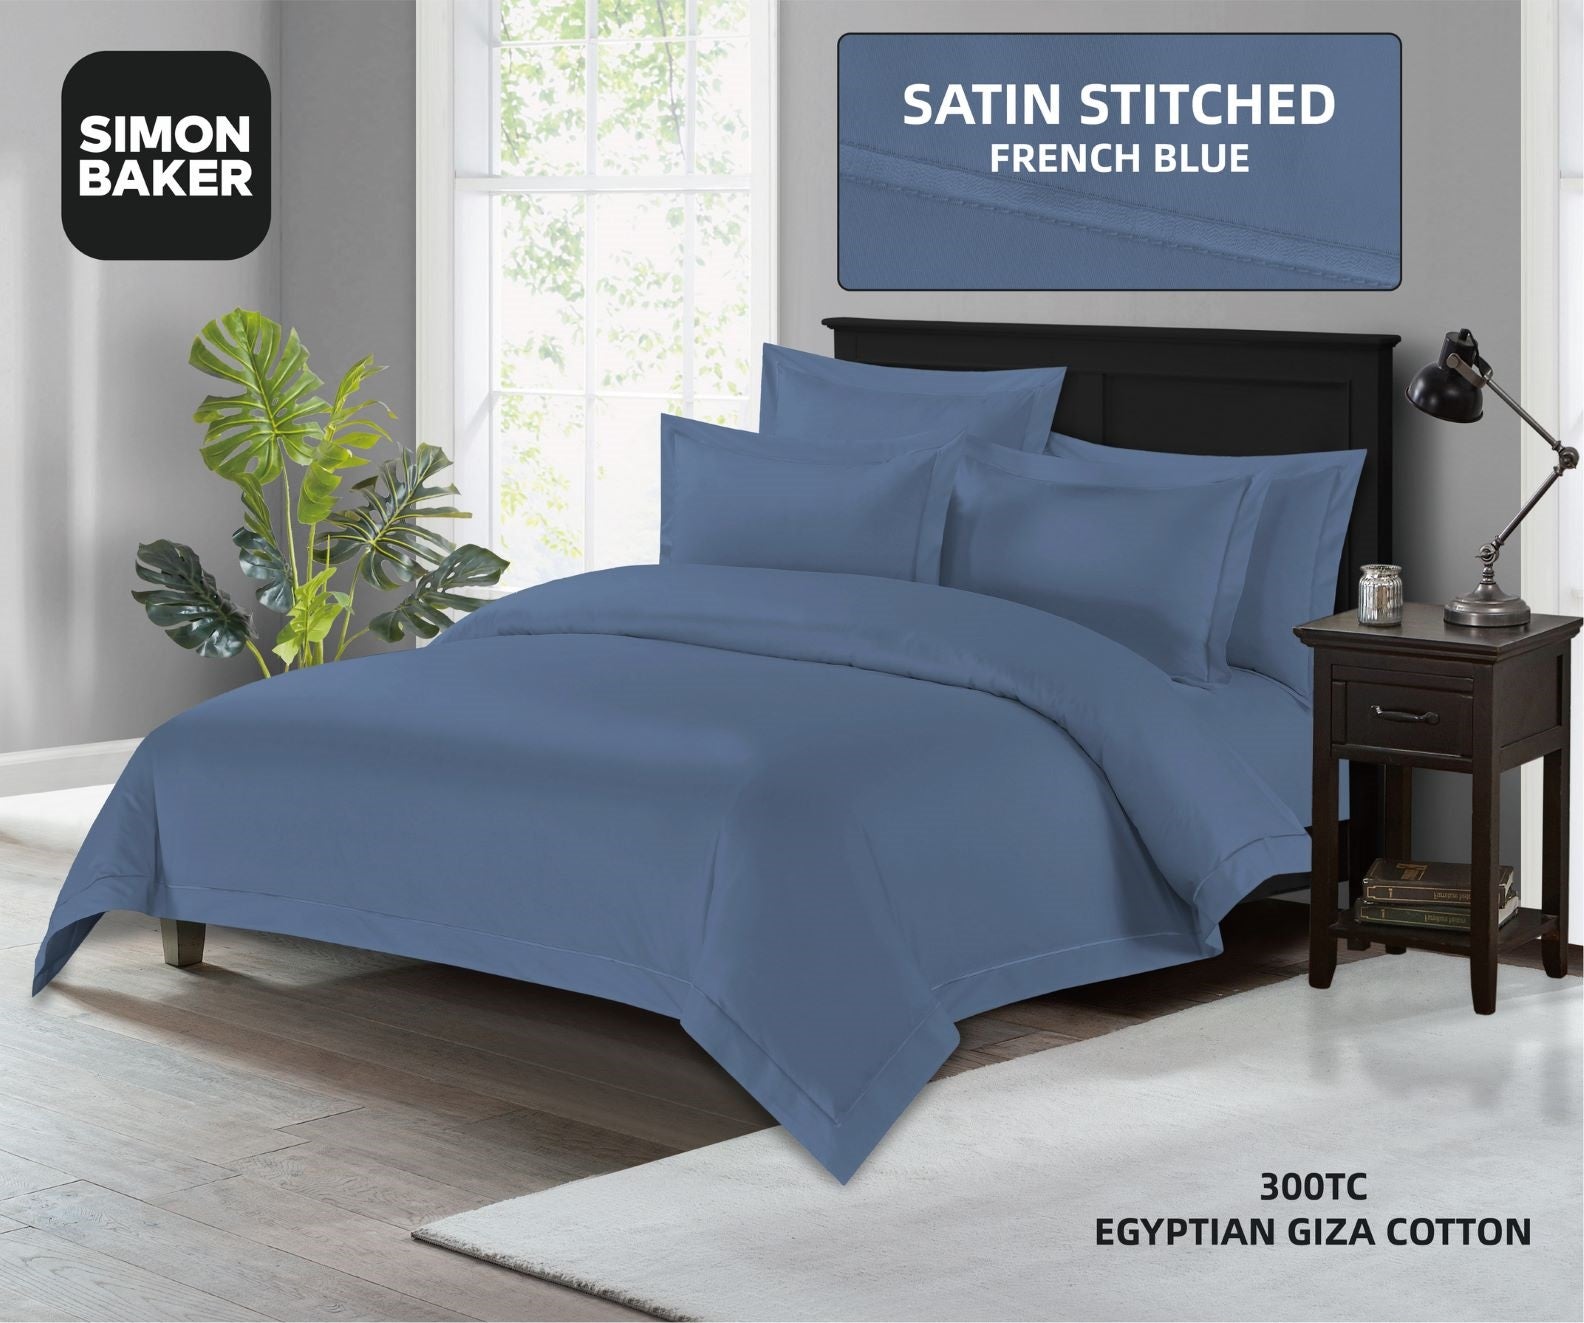 Simon Baker | 300TC 100% Egyptian Cotton FITTED SHEET STANDARD French Blue (Various Sizes)